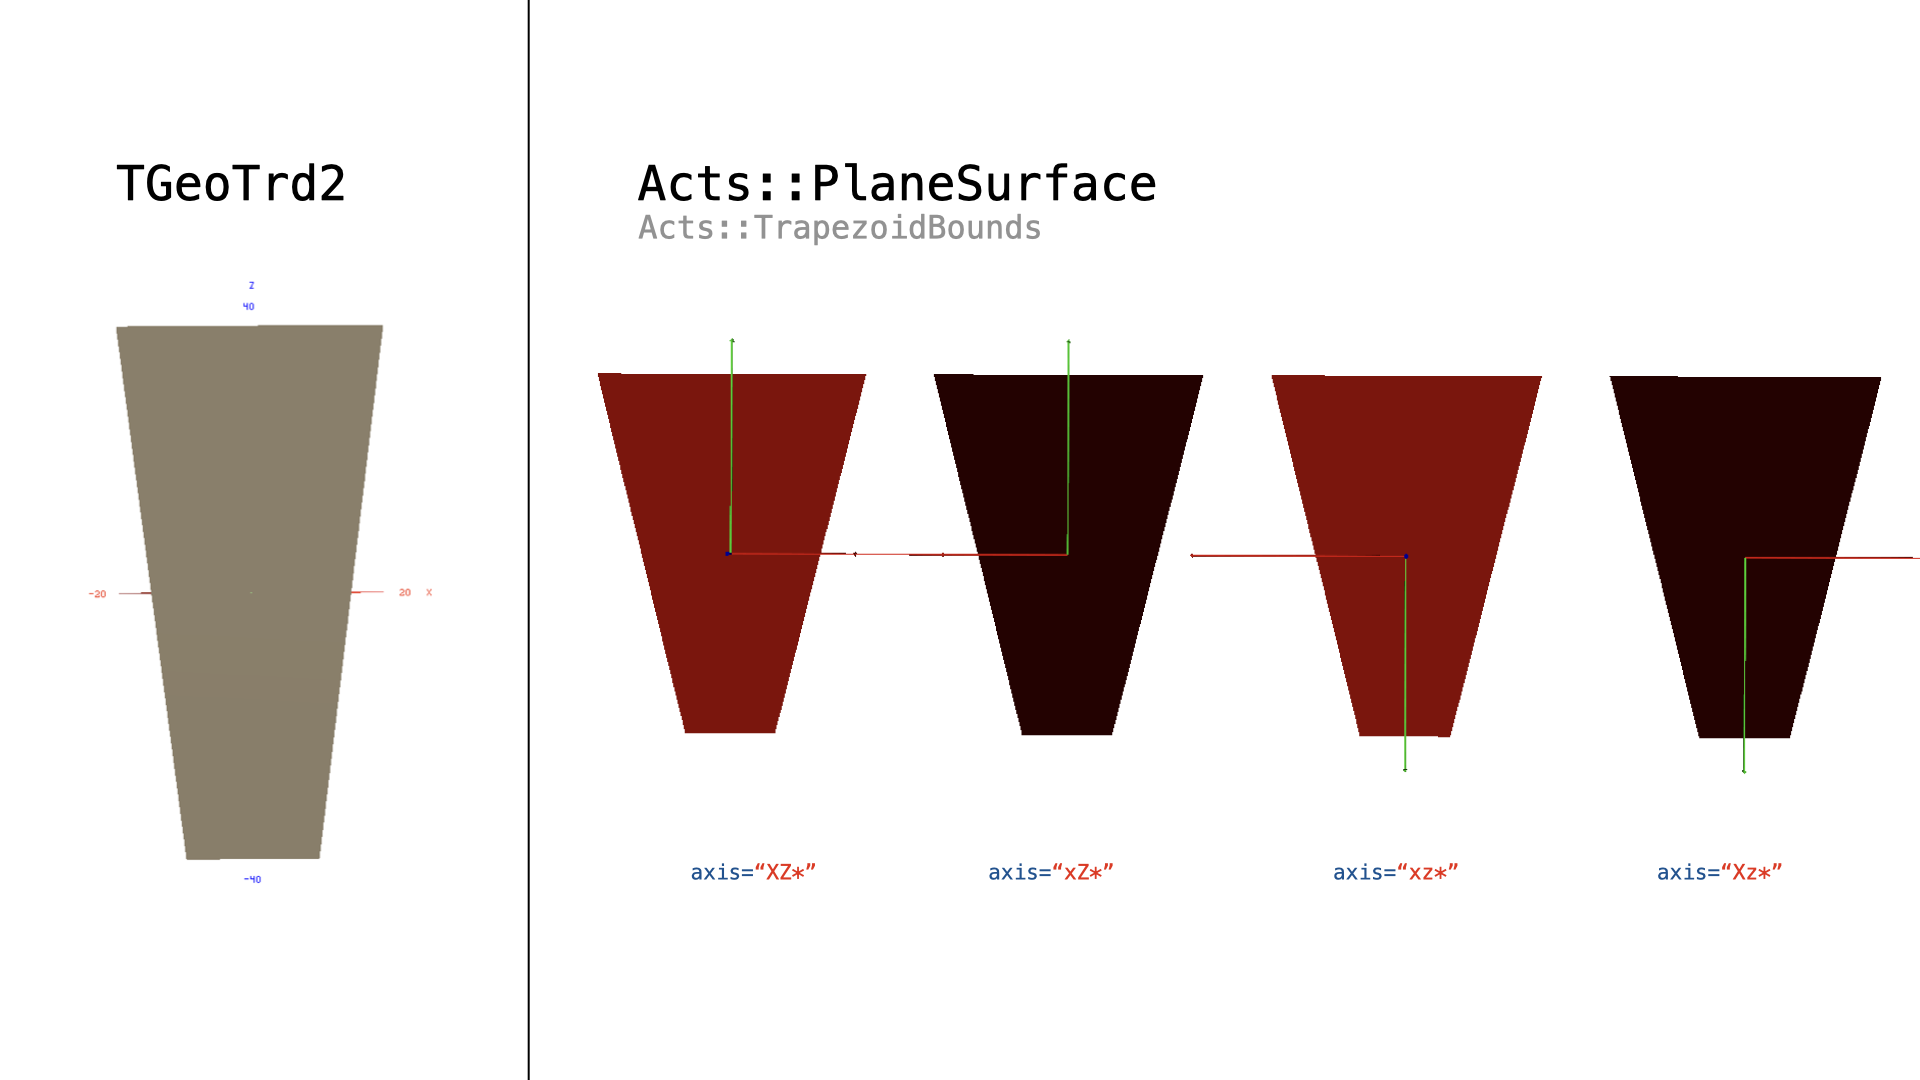 Conversion of a ``TGeoTrd2`` shape into a ``Acts::PlaneSurface`` with ``Acts::TrapezoidBounds``. The axes definitions shown are ``(y/Y)(z/Z)(*/*)``, the second coordinate has to be the z-axis.